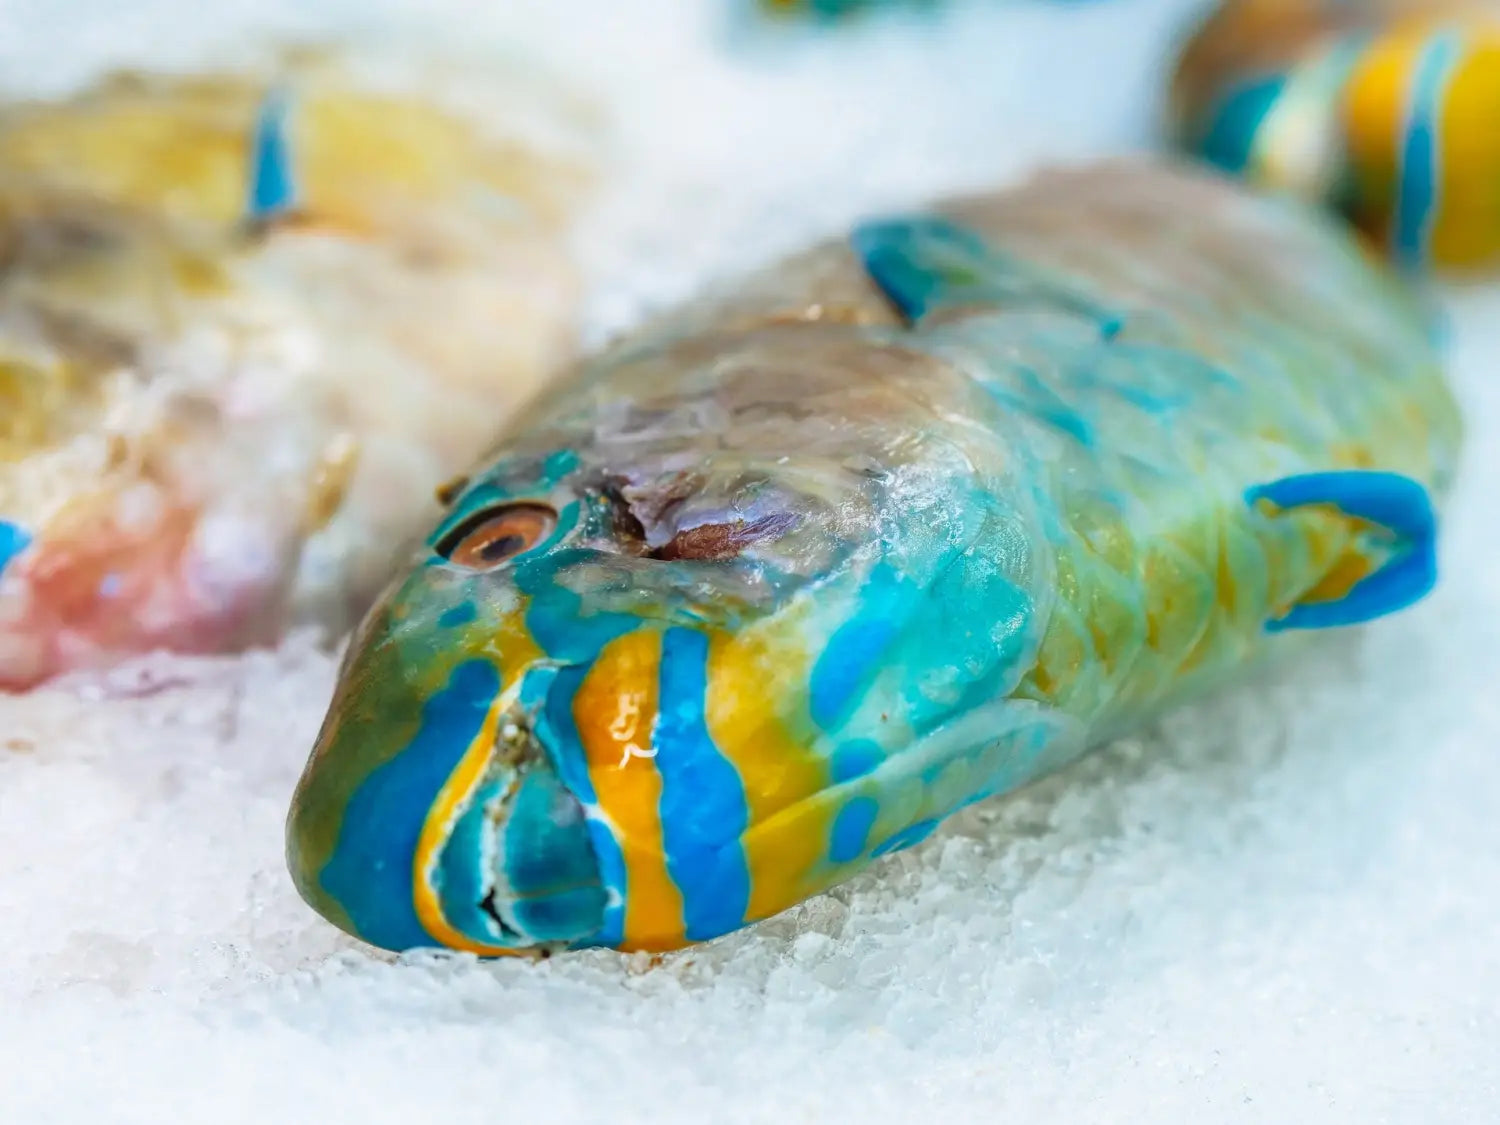 Why We Need to Stop Eating Parrot Fish